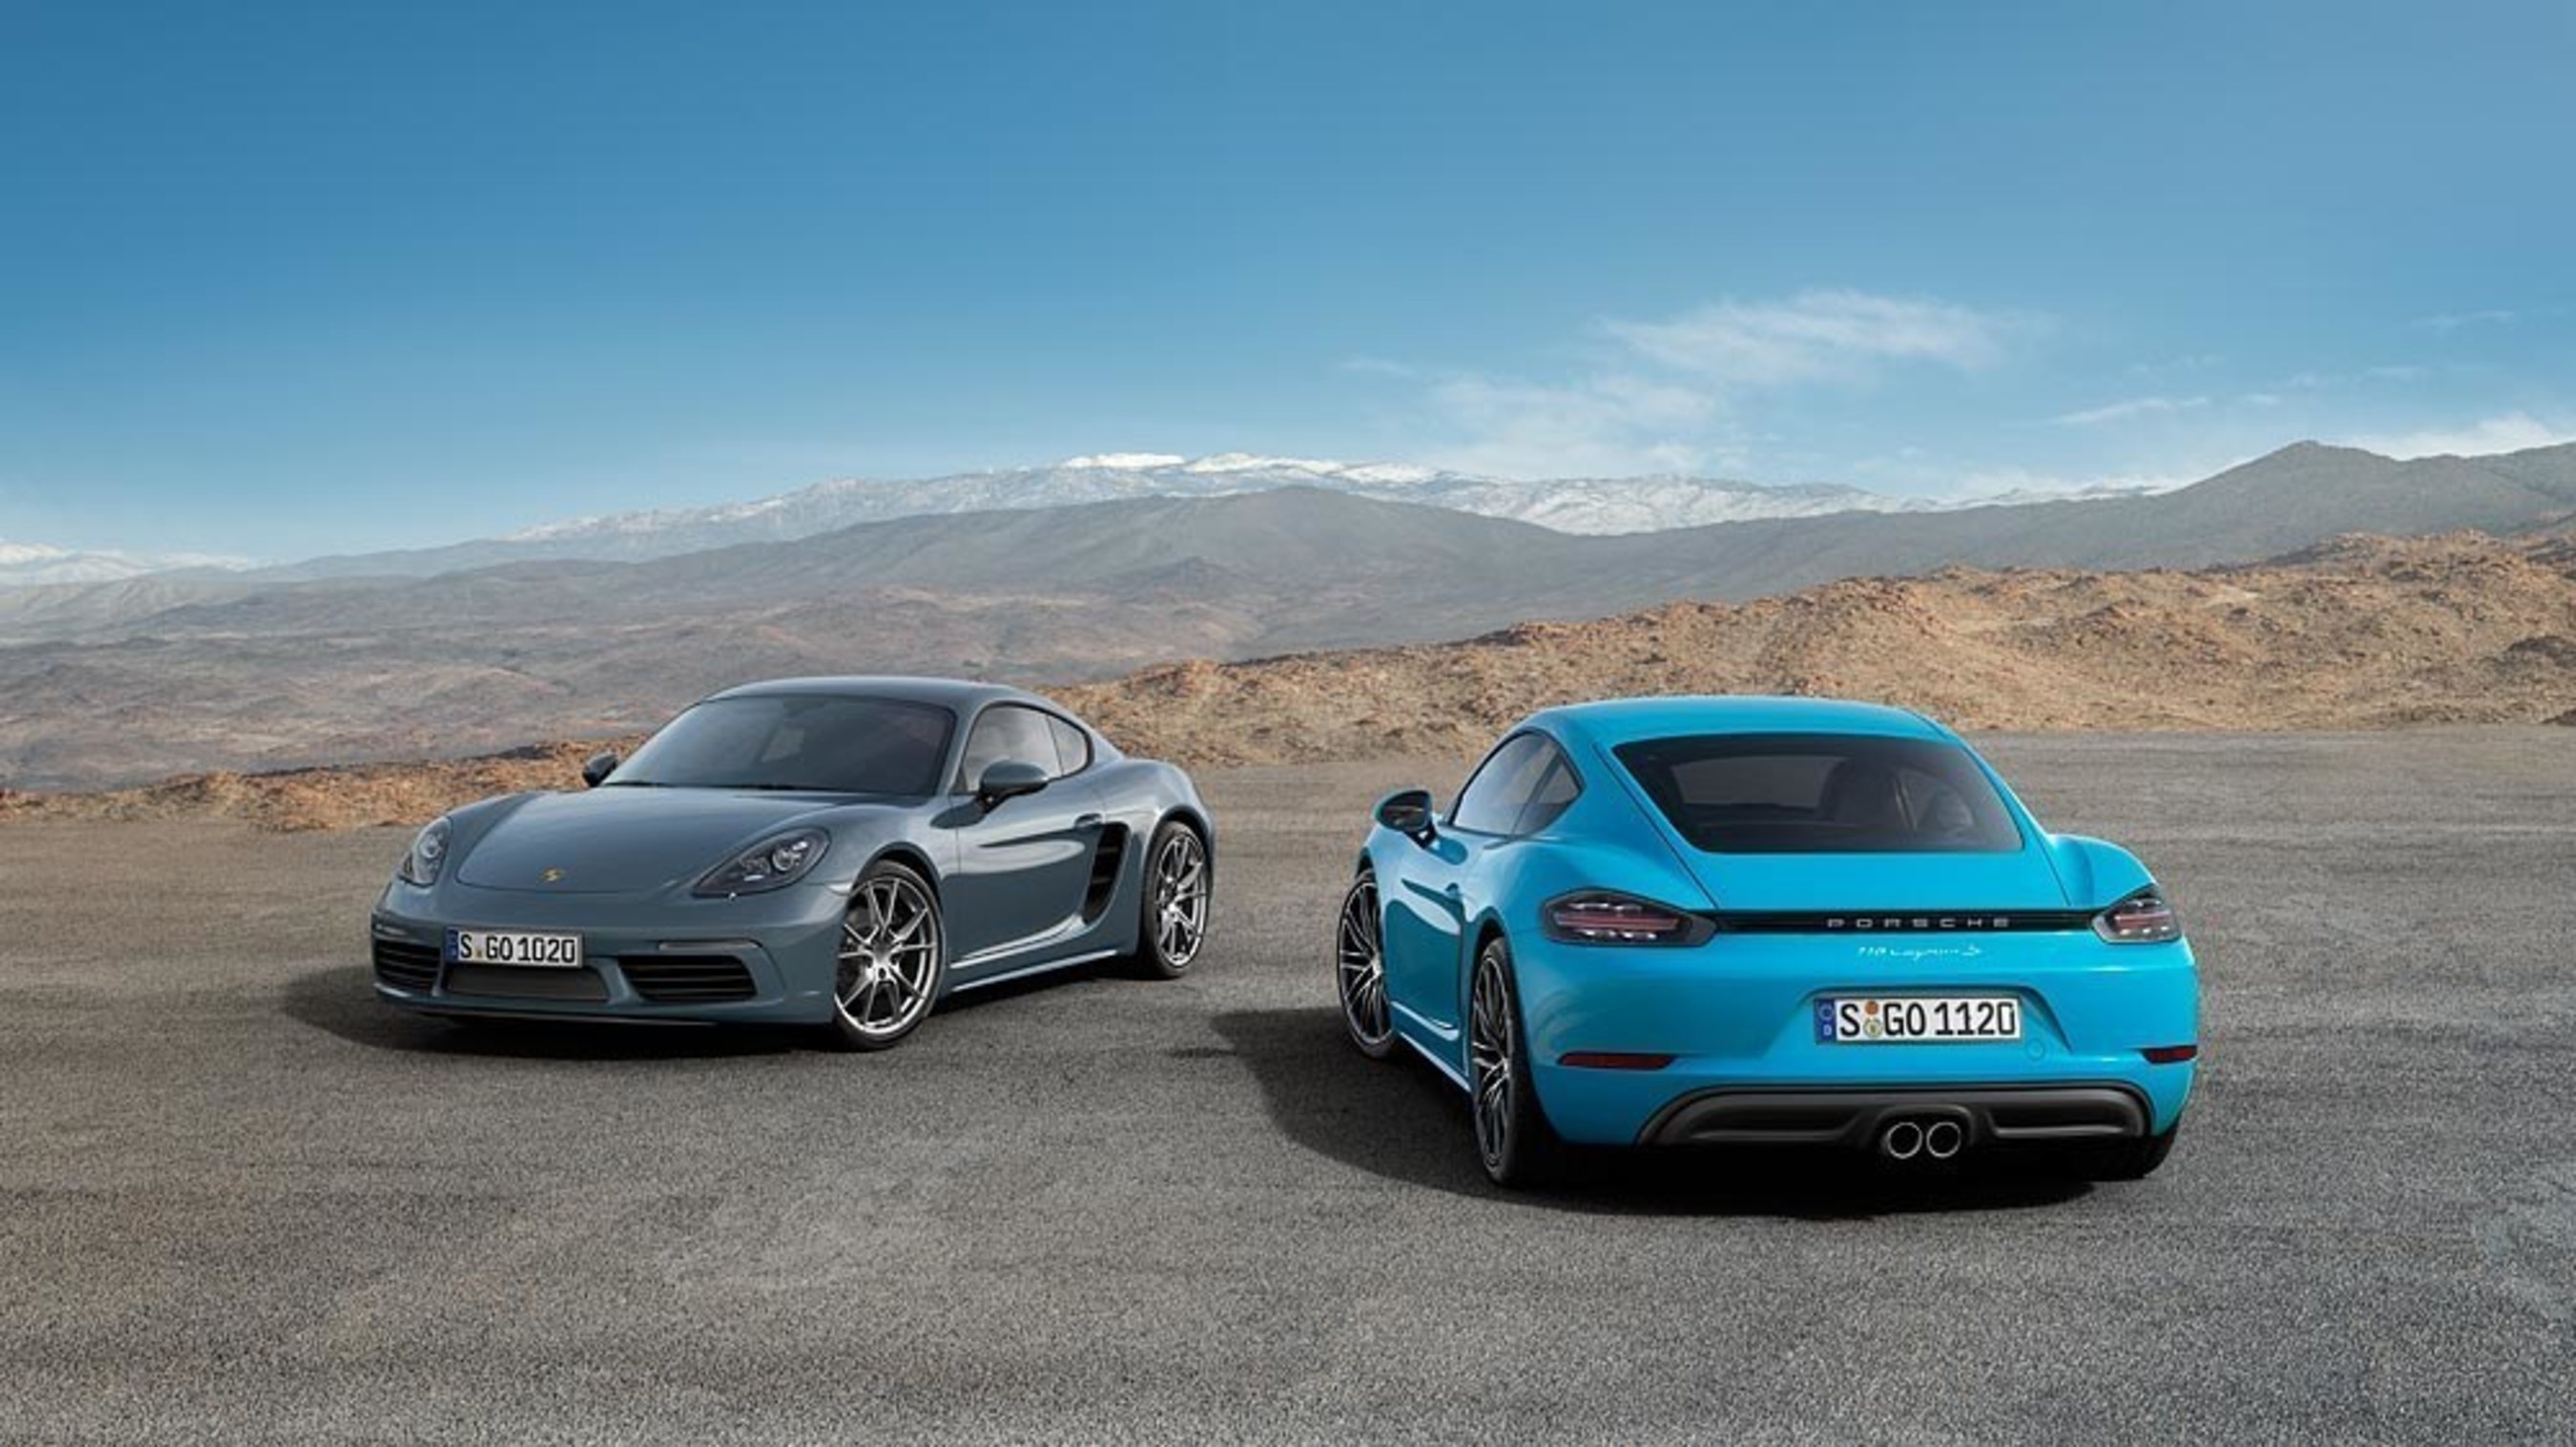 The new 2017 Porsche 718 Cayman and 718 Cayman S